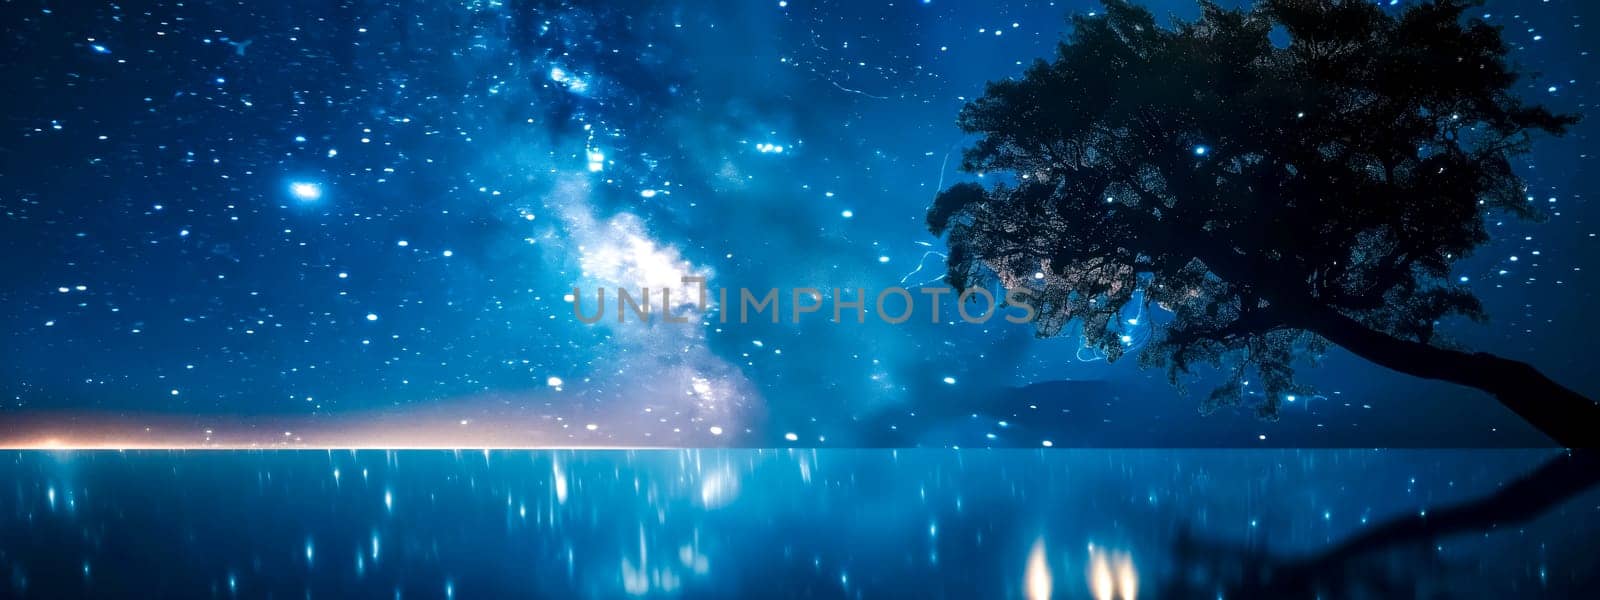 Enchanted night under the stars by the lake by Edophoto